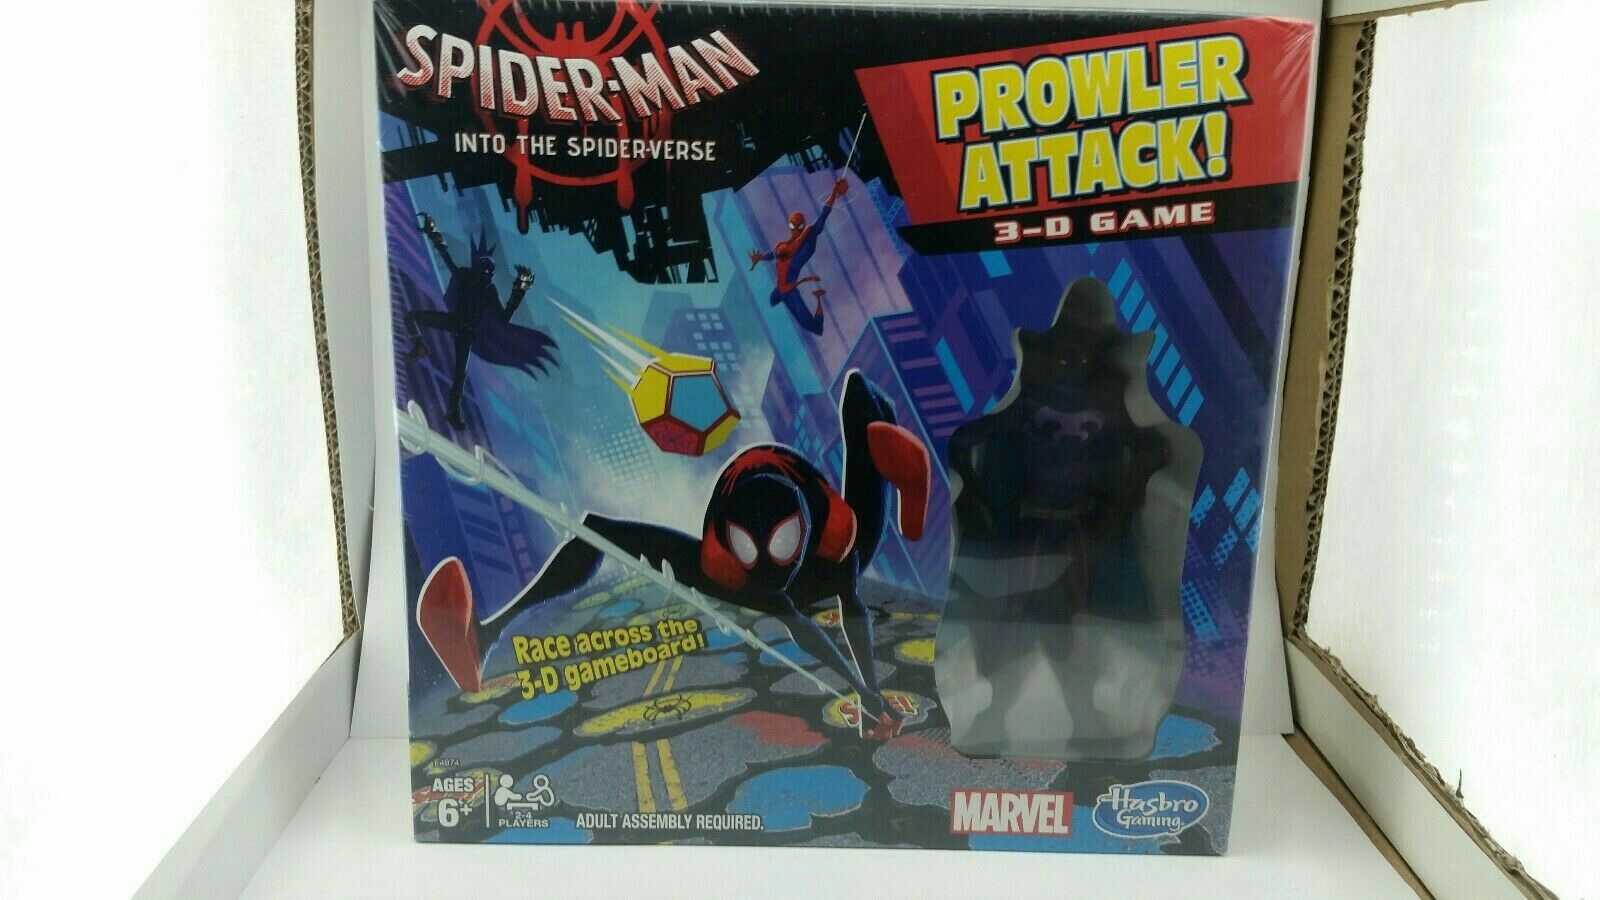 Spider-man Into The Spider-Verse Prowler Attack! 3D Game Hasbro